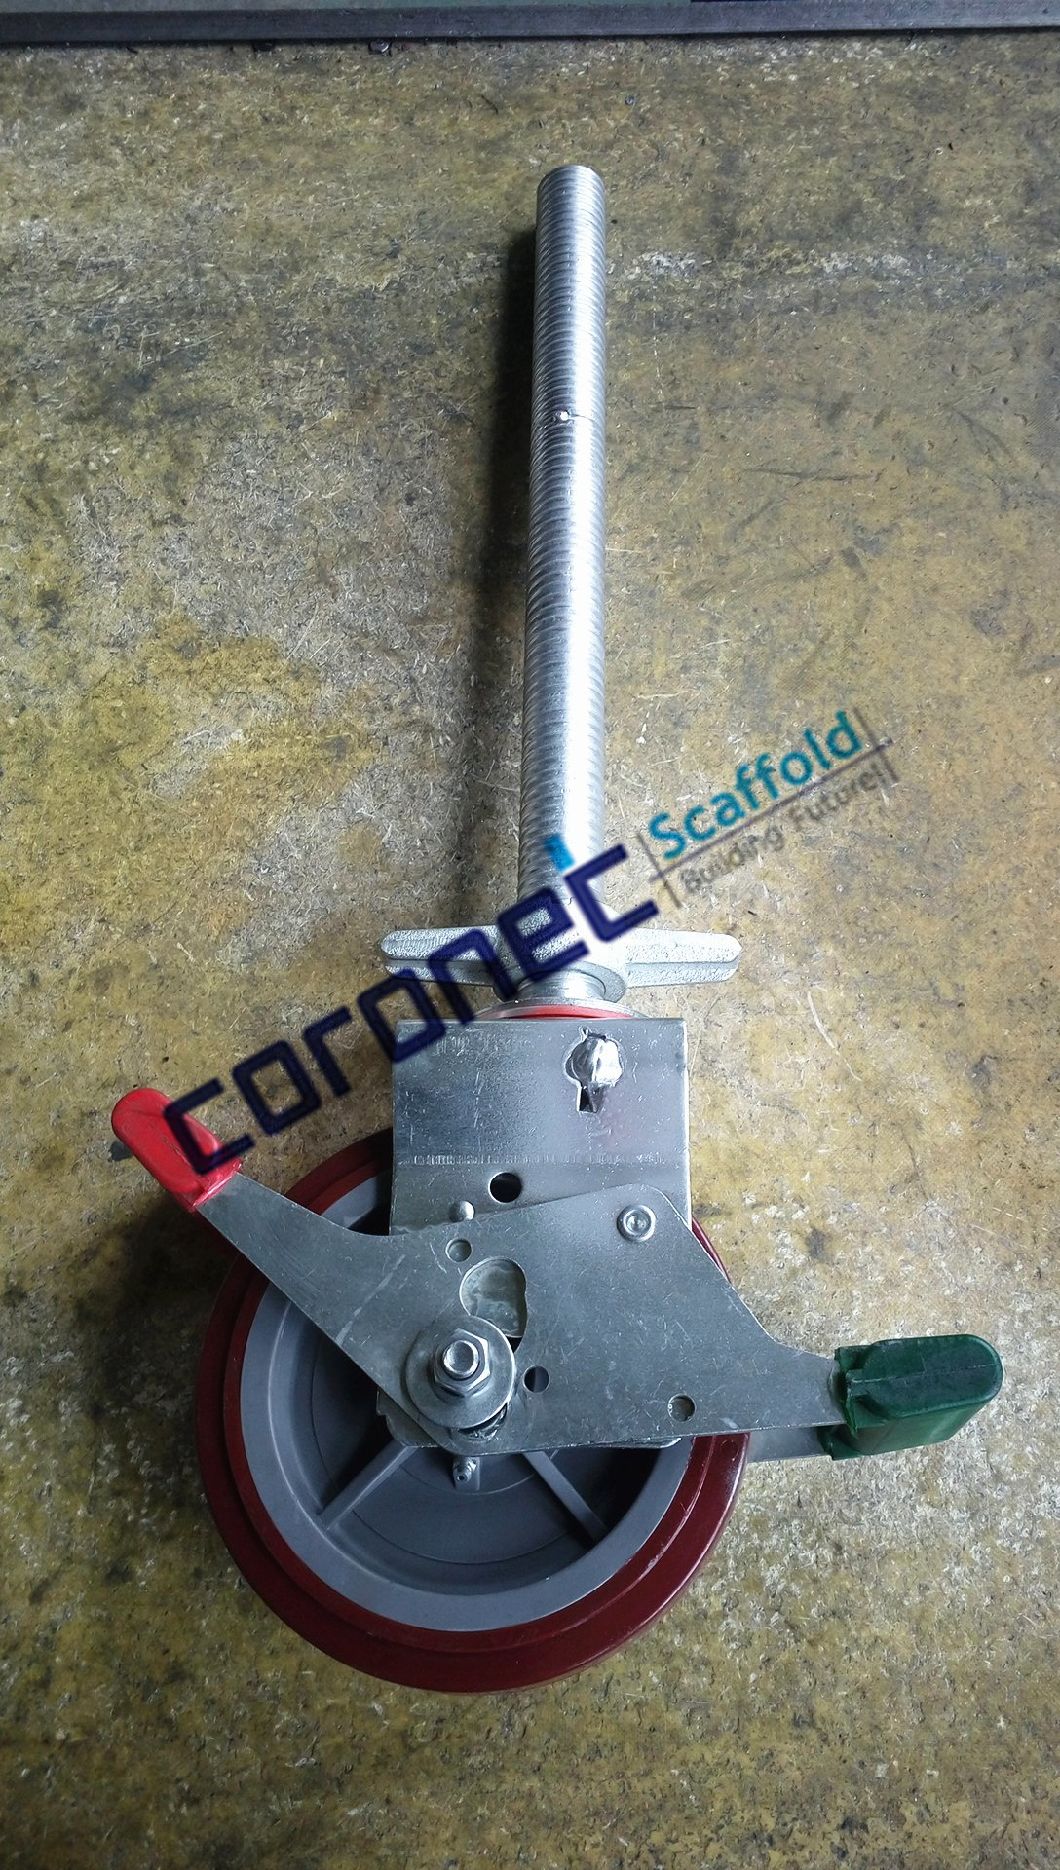 Scaffolding Material Heavy Duty Caster with Polyurethane on Cast Iron Wheel